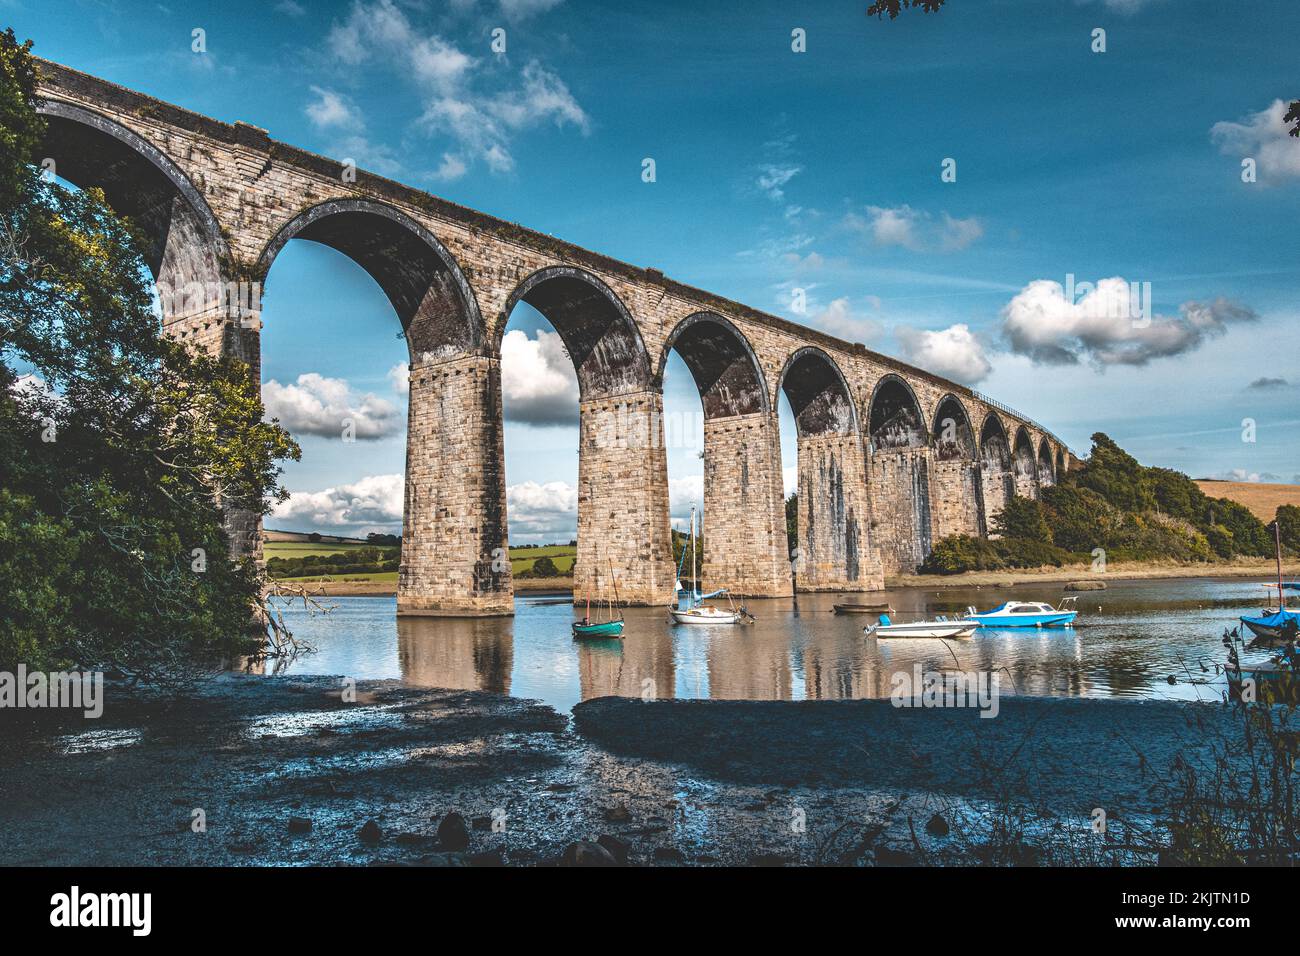 St Germans Viaduct Over the River Tiddy Stock Photo